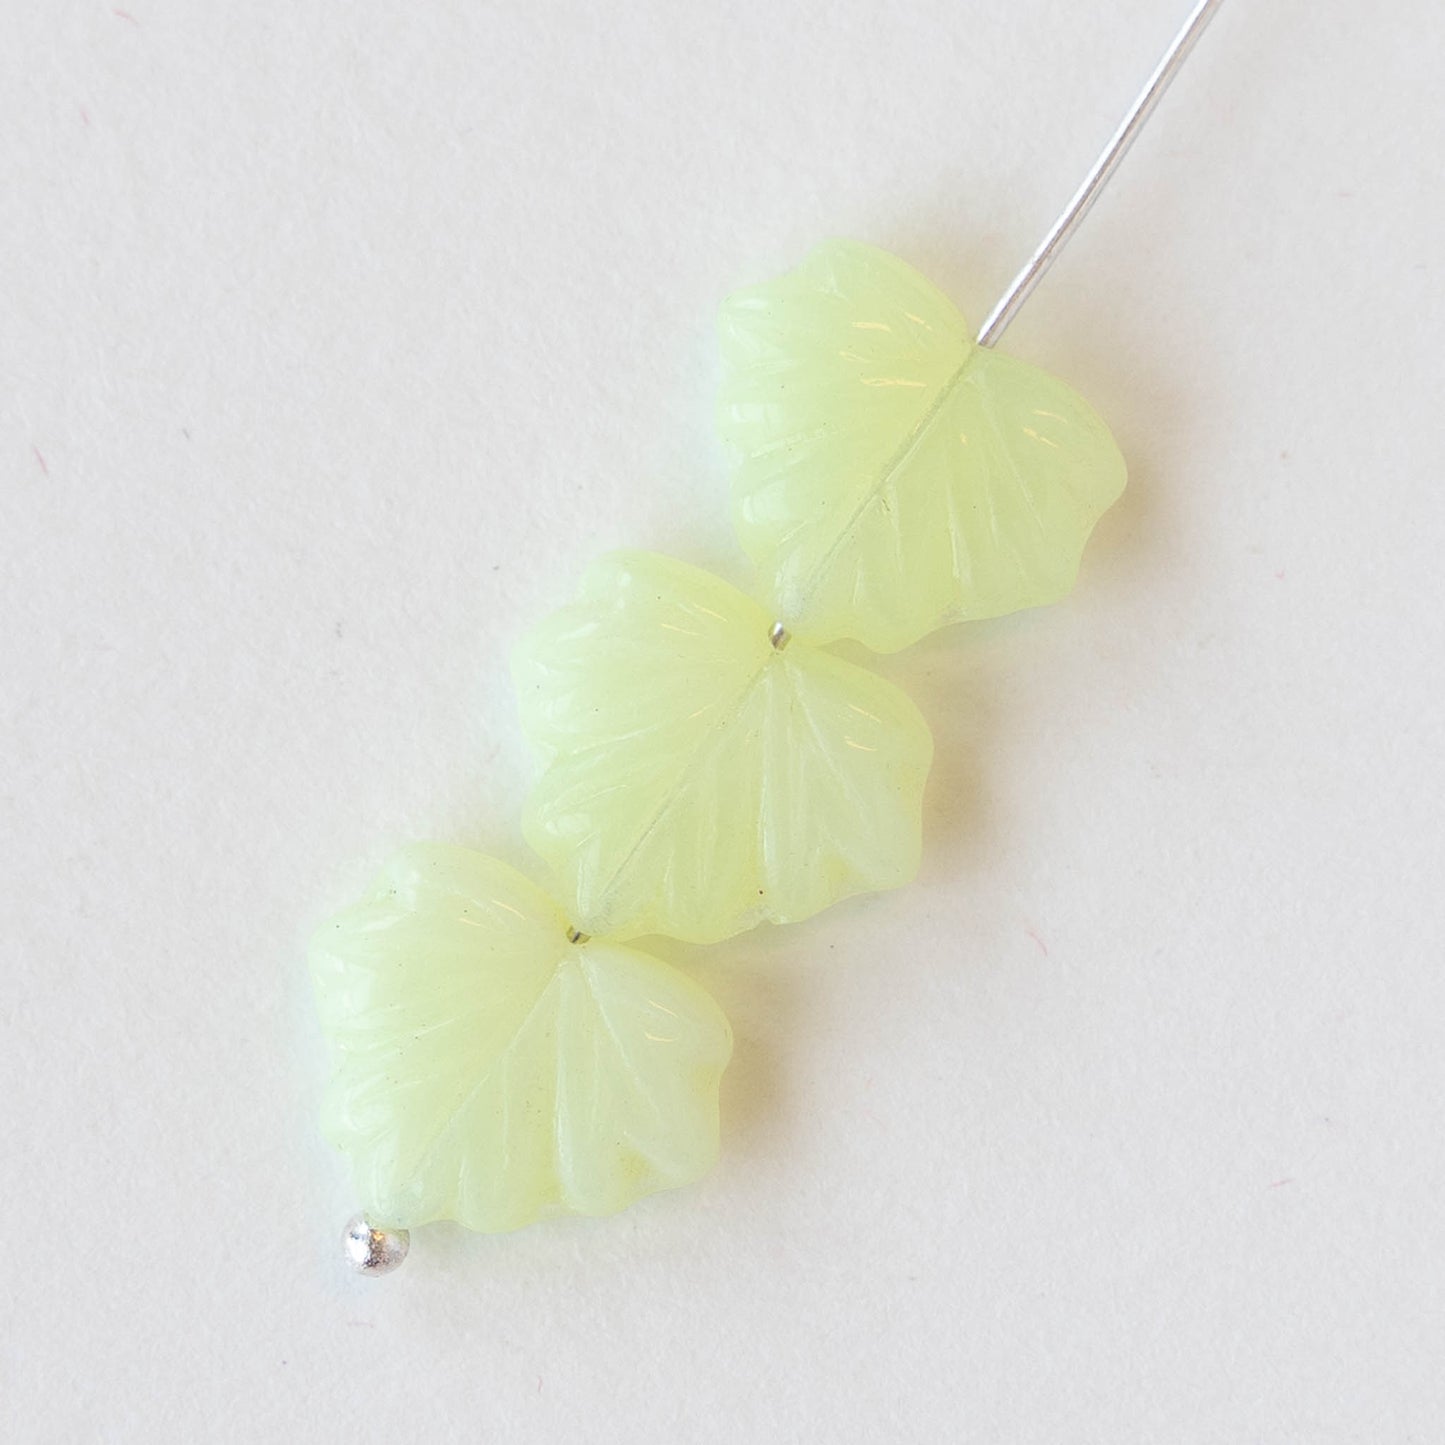 13mm Maple Leaf Beads -  Jonquil Yellow  - 10 or 20 Beads